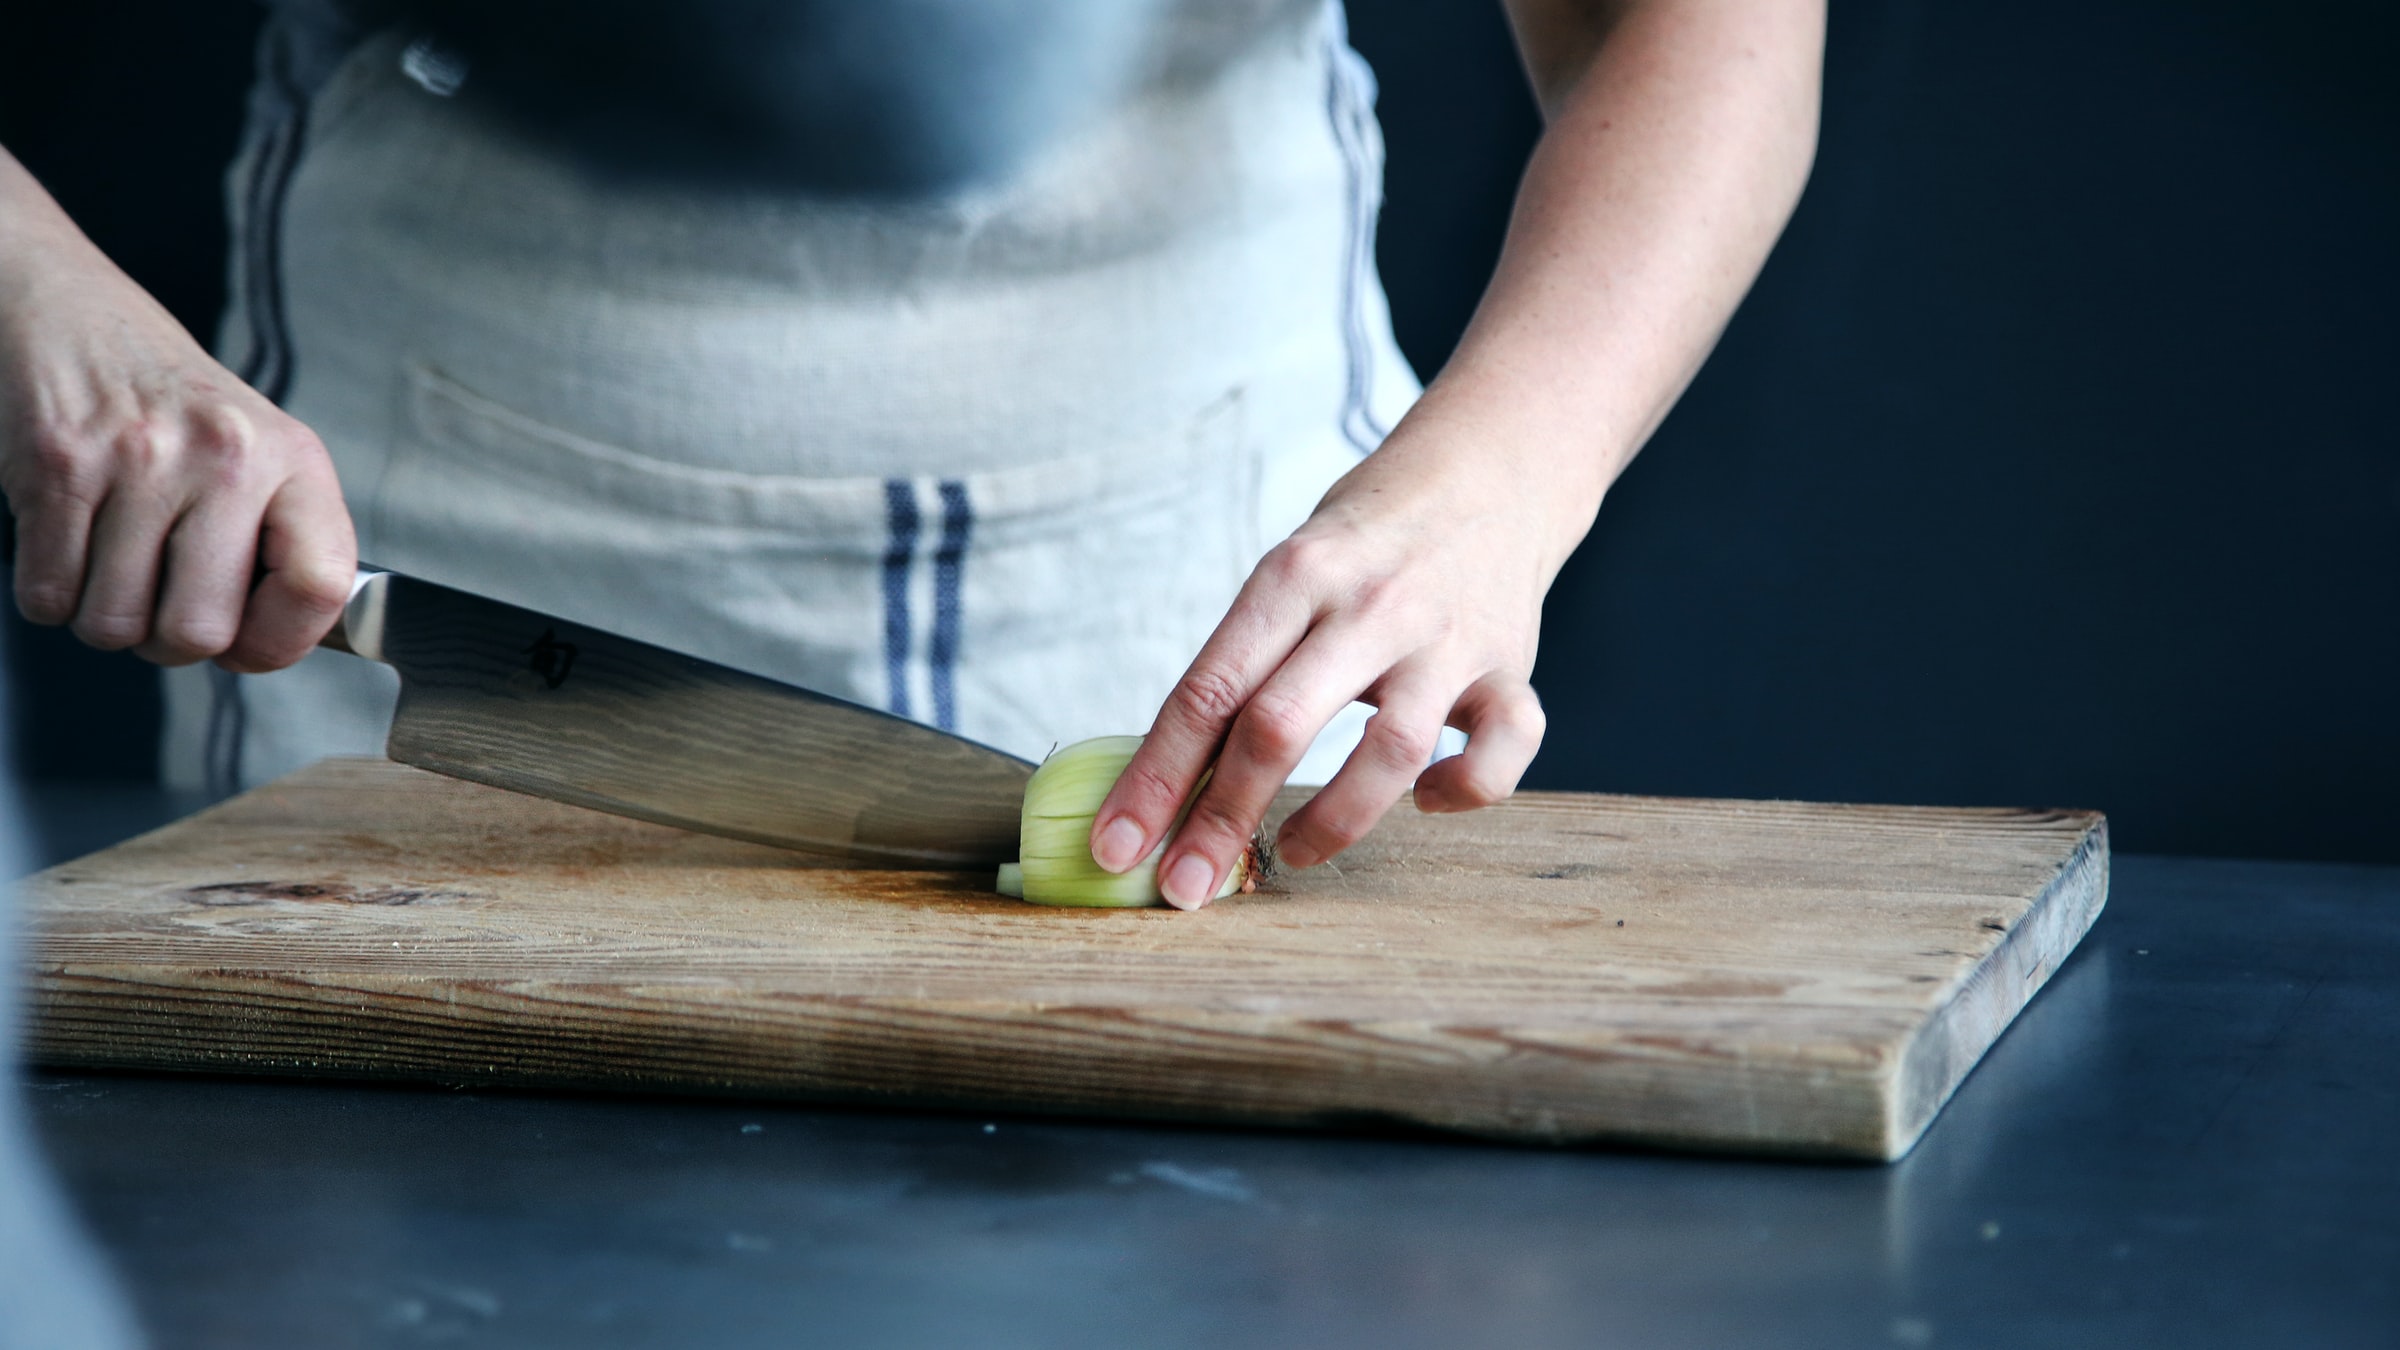 How to Clean a Wooden Cutting Board